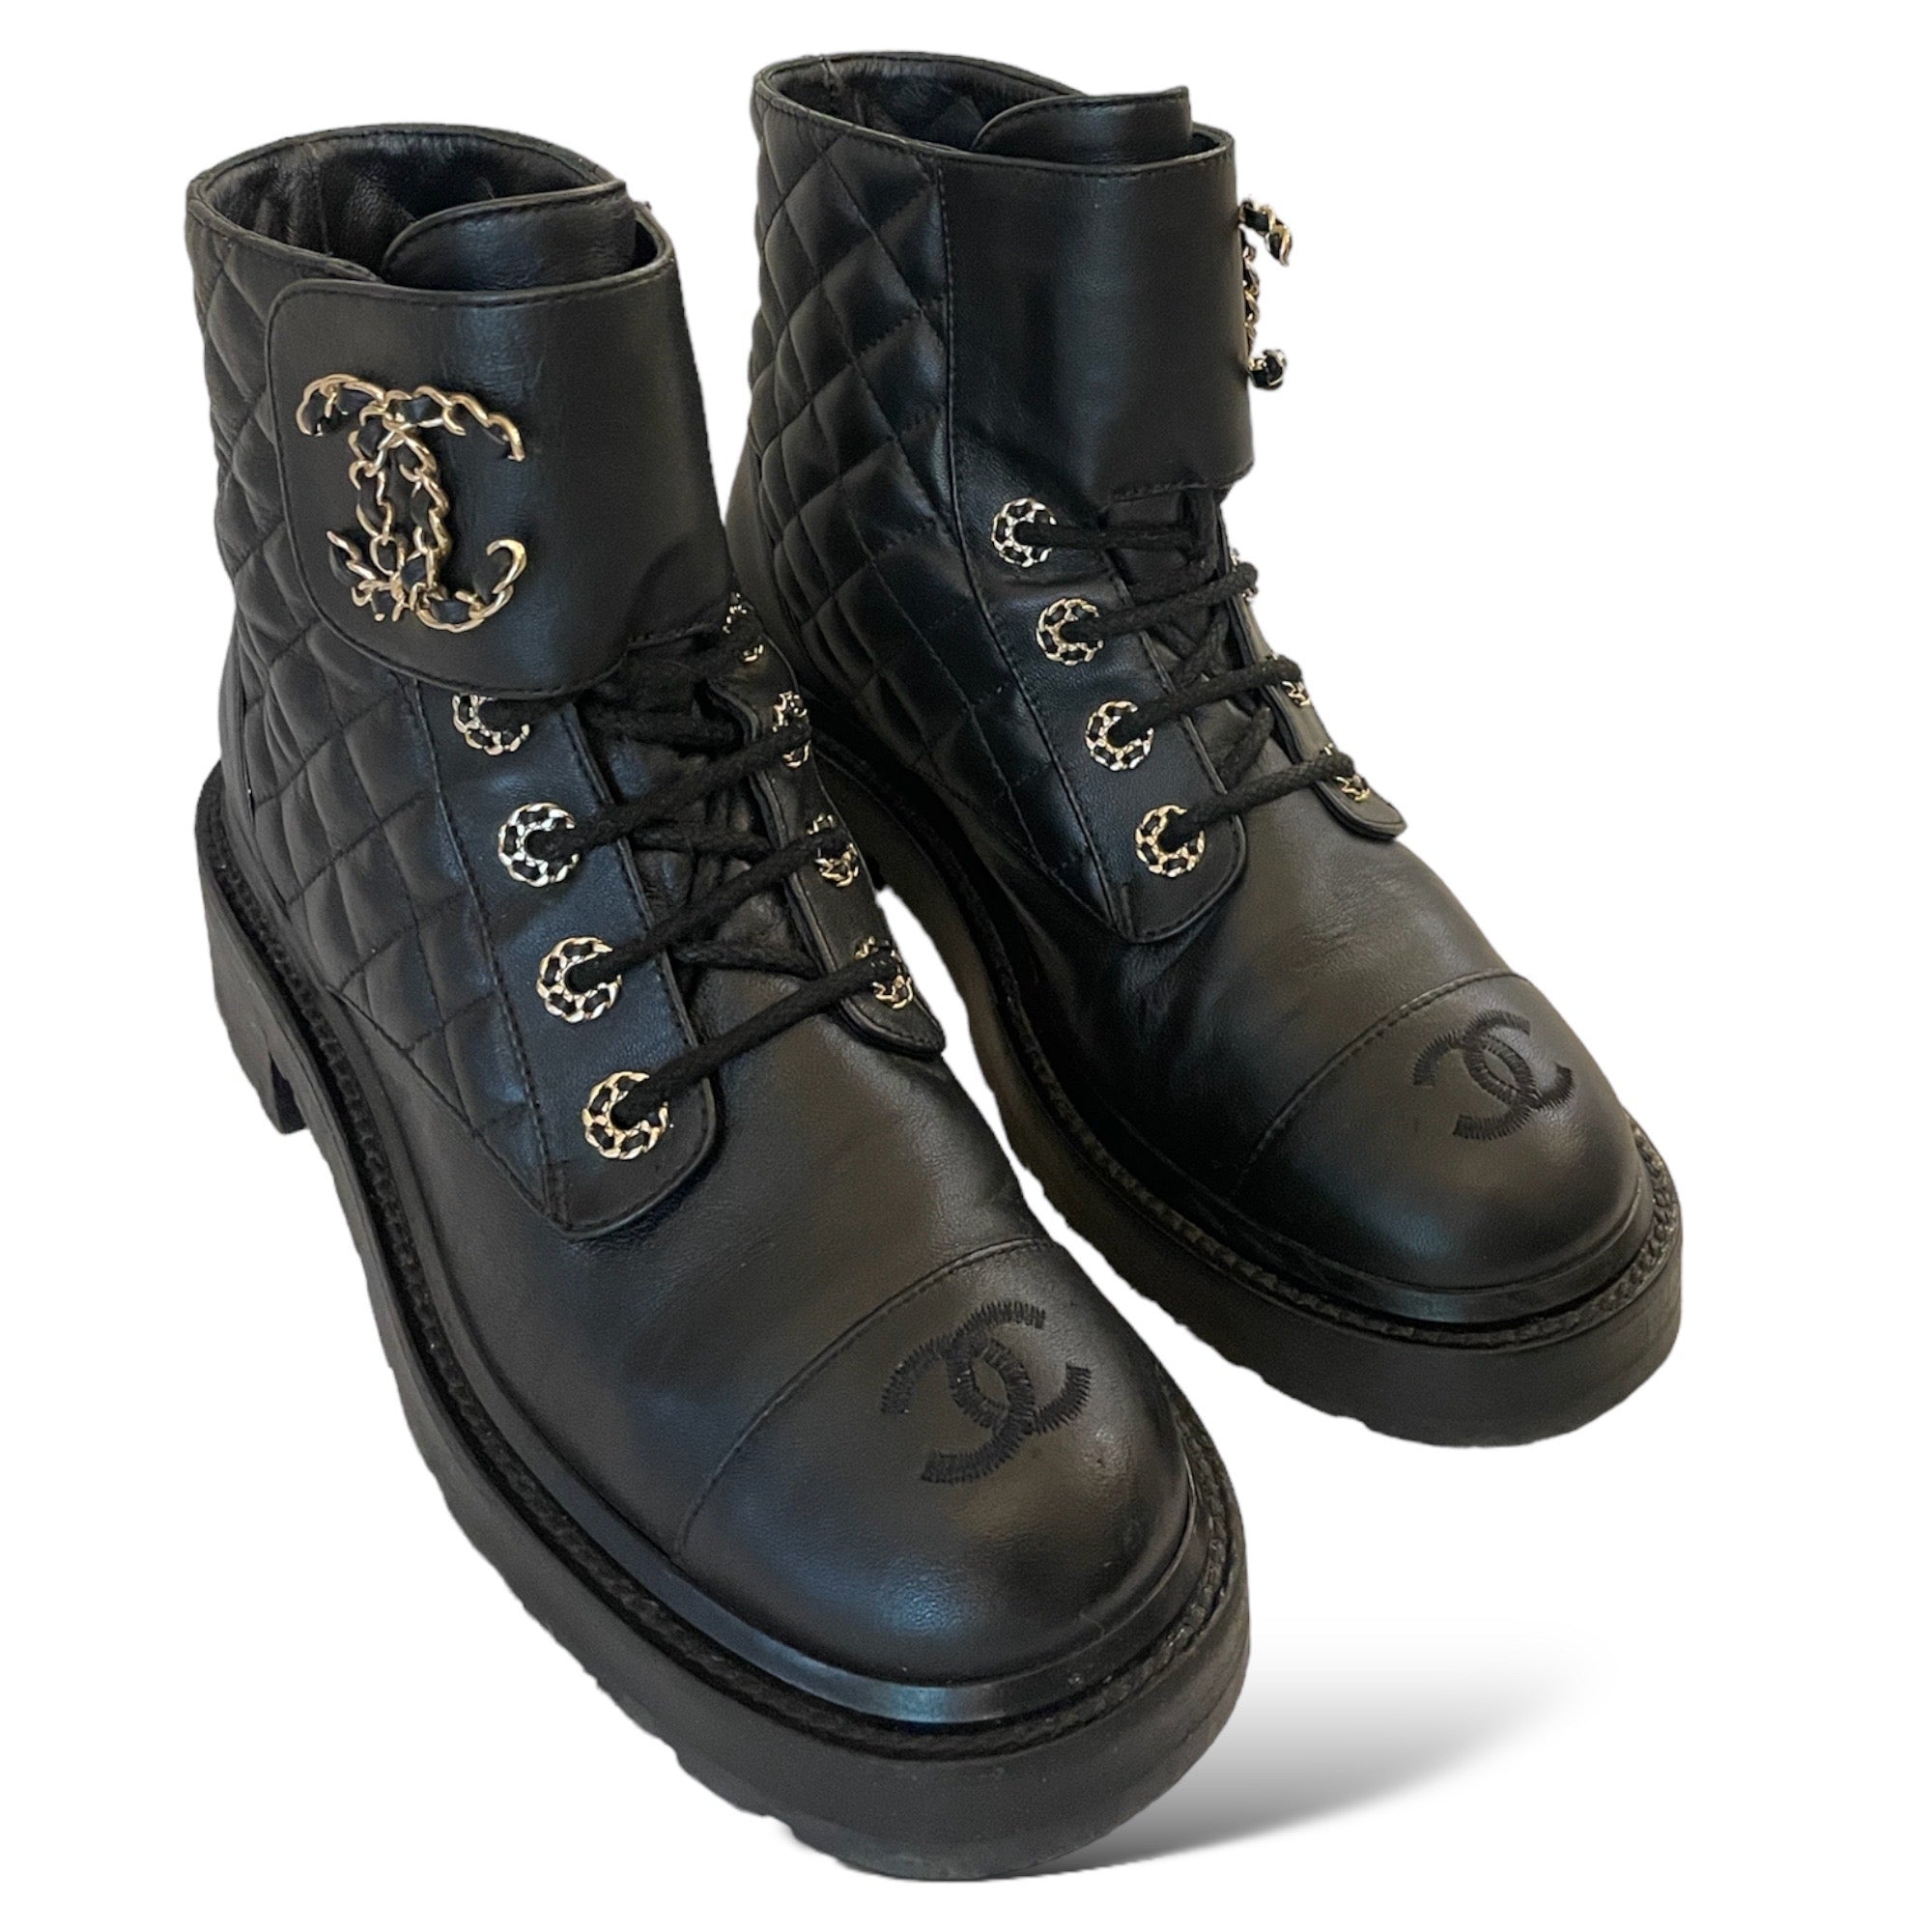 CHANEL Fall 2021 Black Lambskin Lace-Up Boots
|Size: 38|